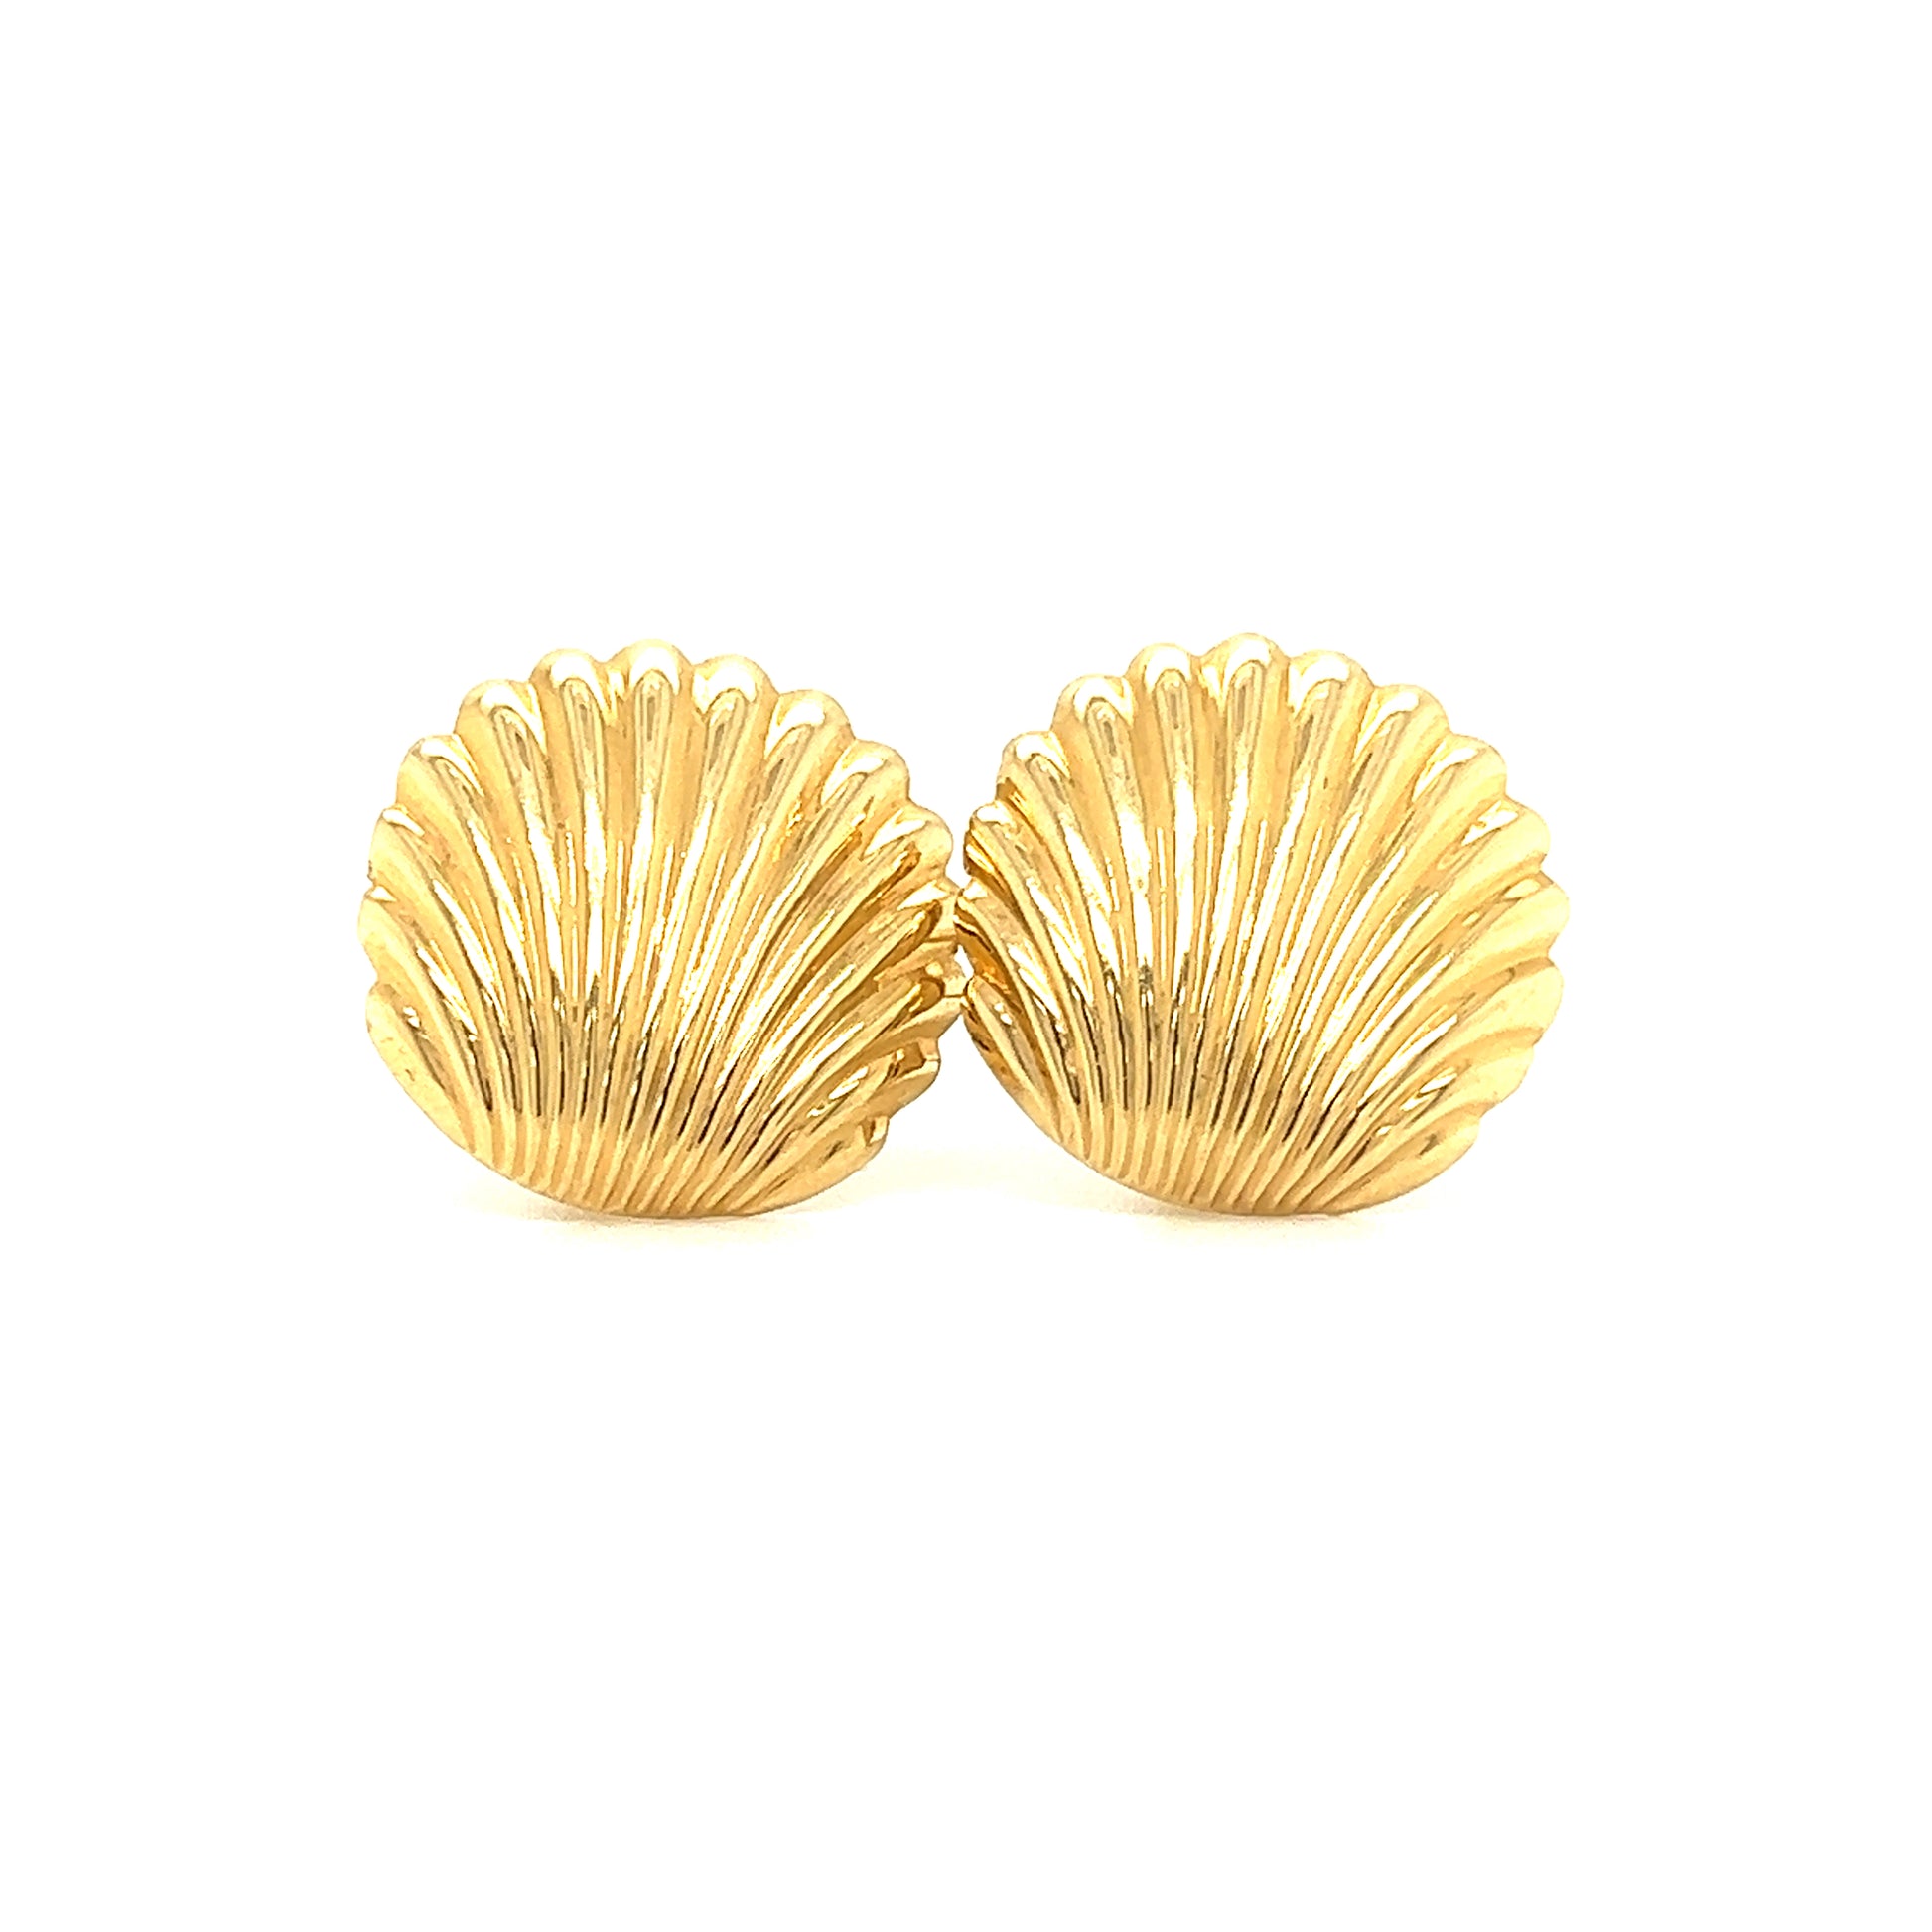 Scallop Post Earrings in 14K Yellow Gold Front View